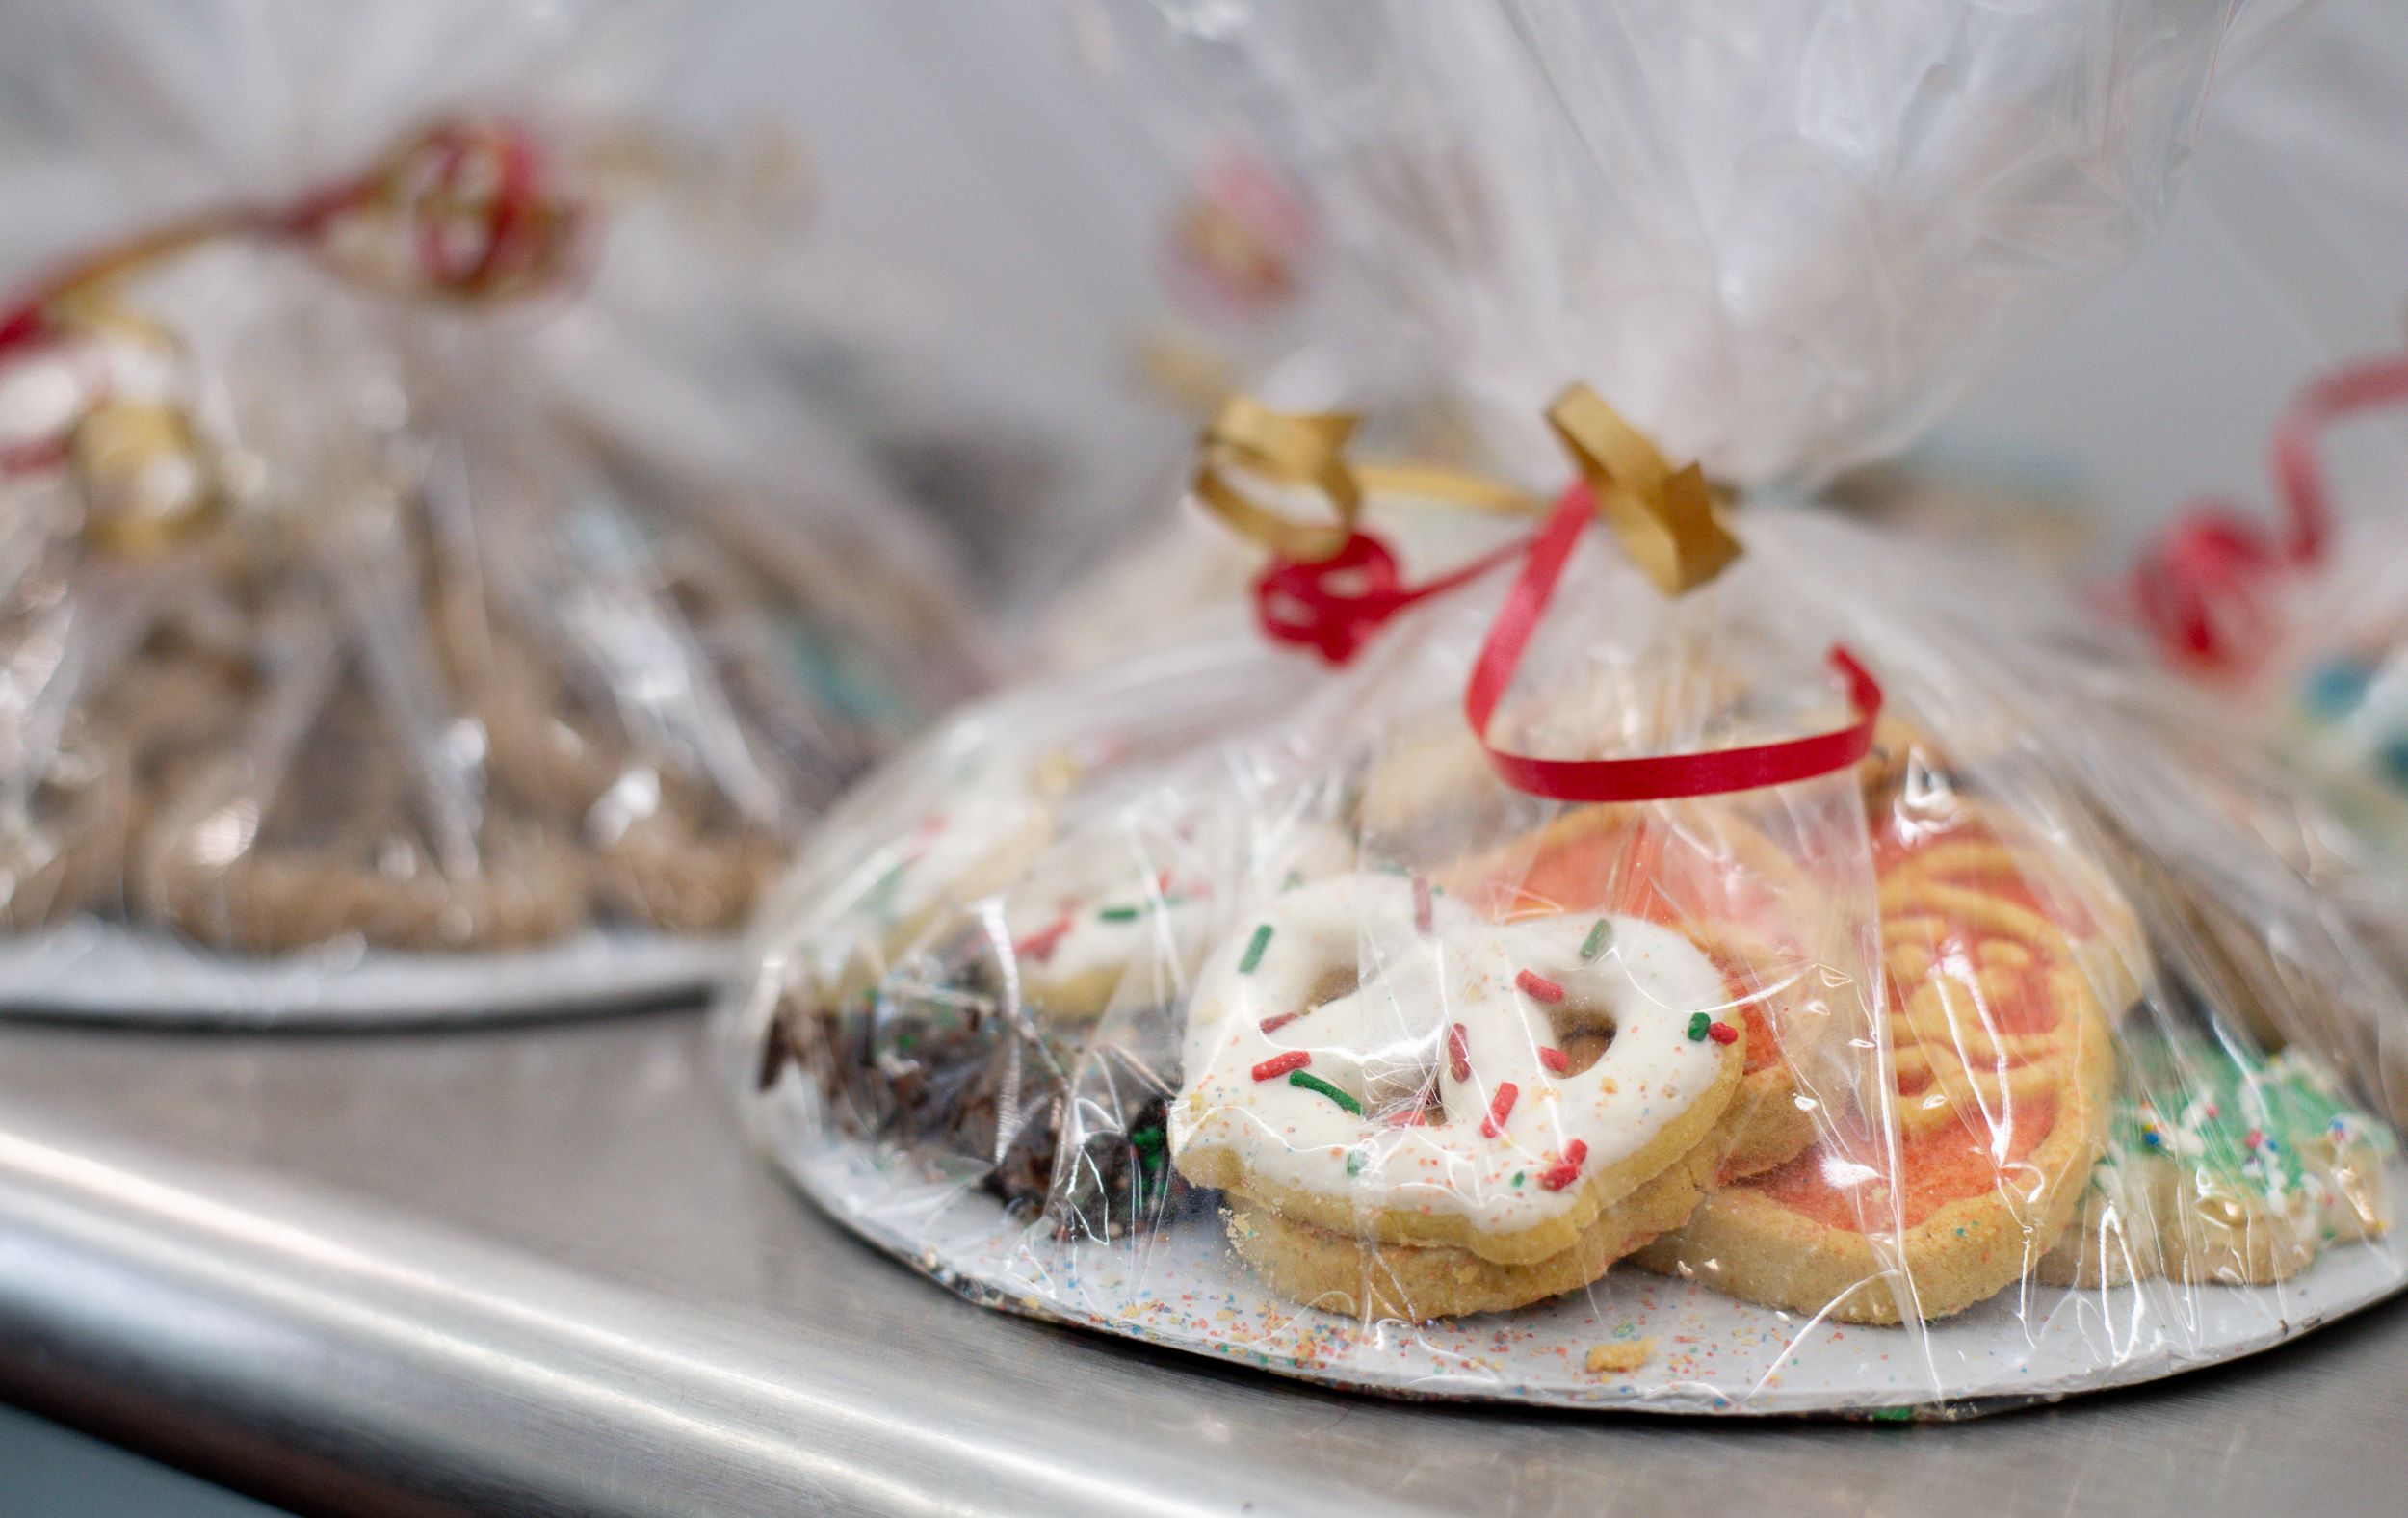 Assorted holiday cookies decorated with sprinkles and icing, packaged in clear plastic bags tied with red and gold ribbons on a metal tray.